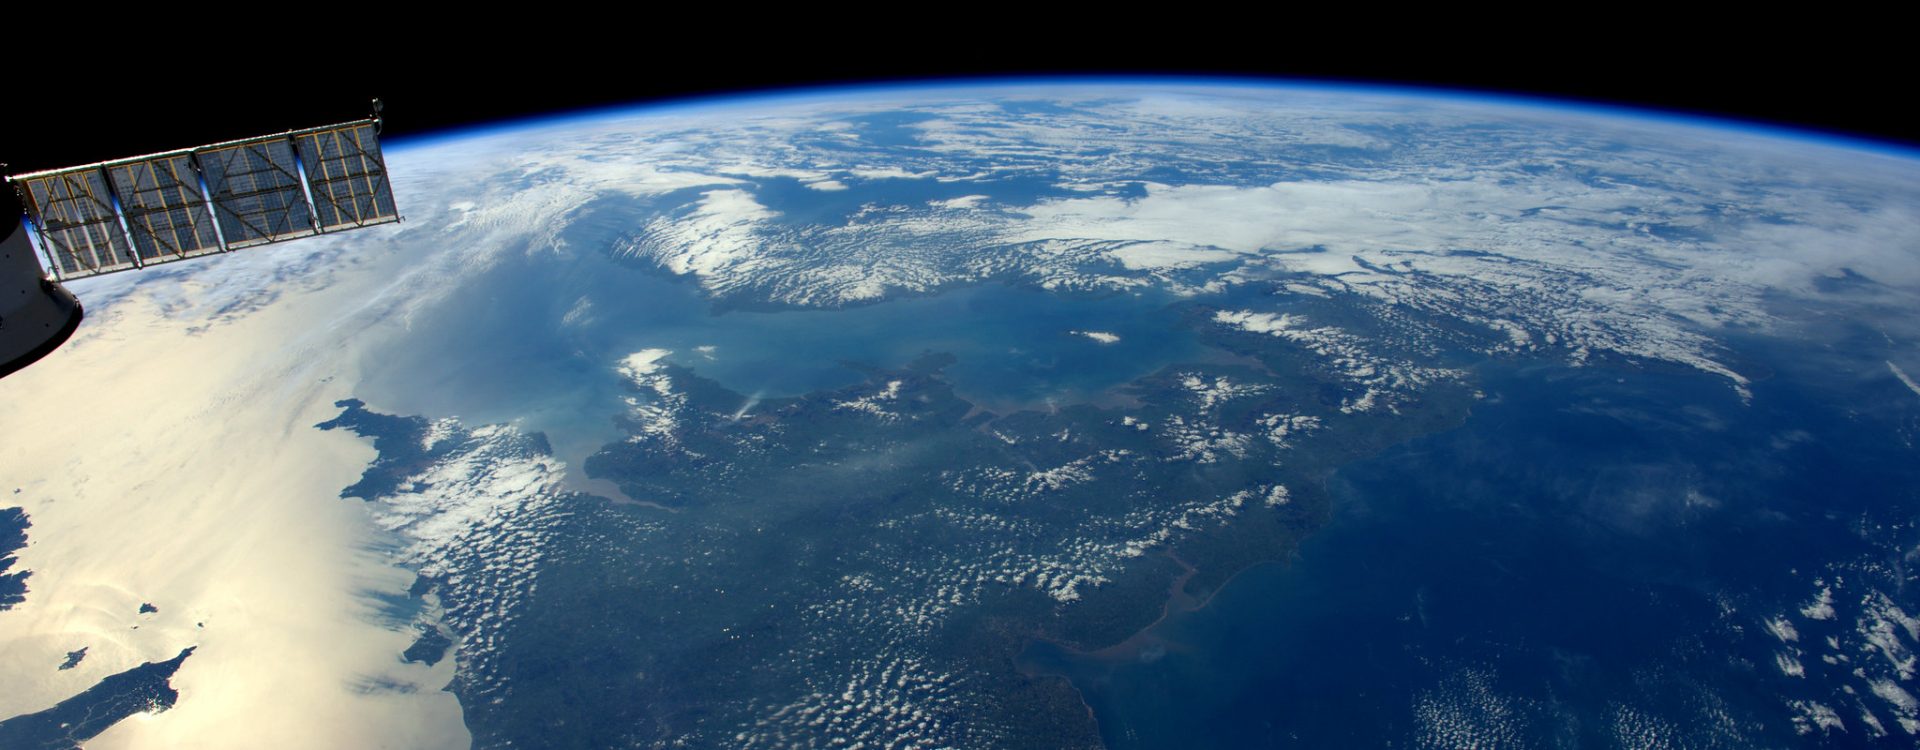 UK from the International Space Station